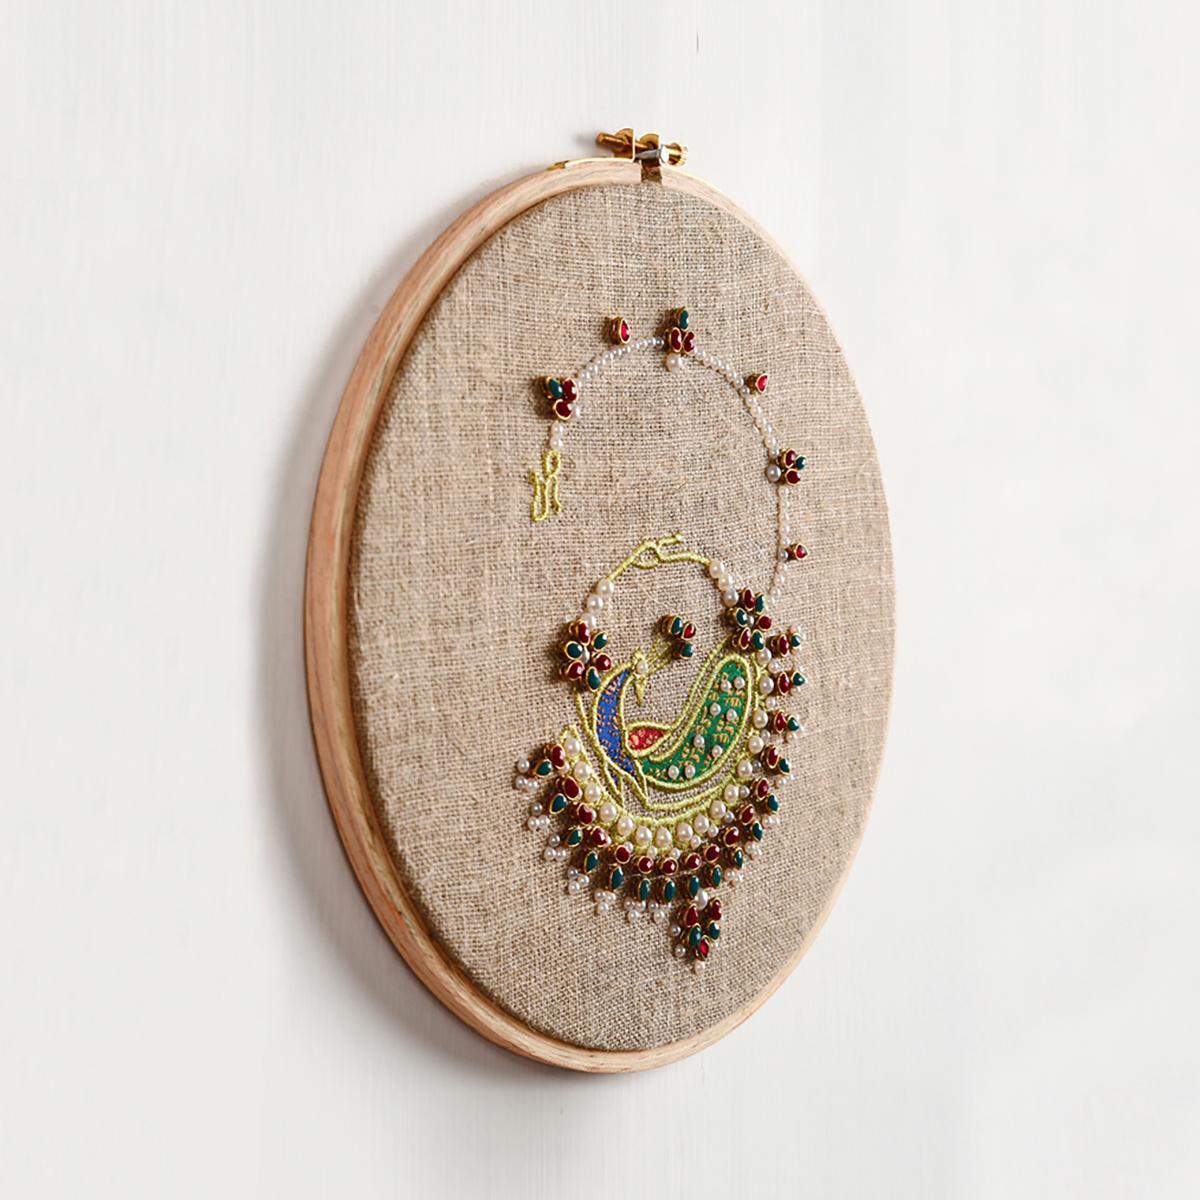 Nath Hoop art, Indian Jewellery embroidery, linen with colors, wall decor, size 10"